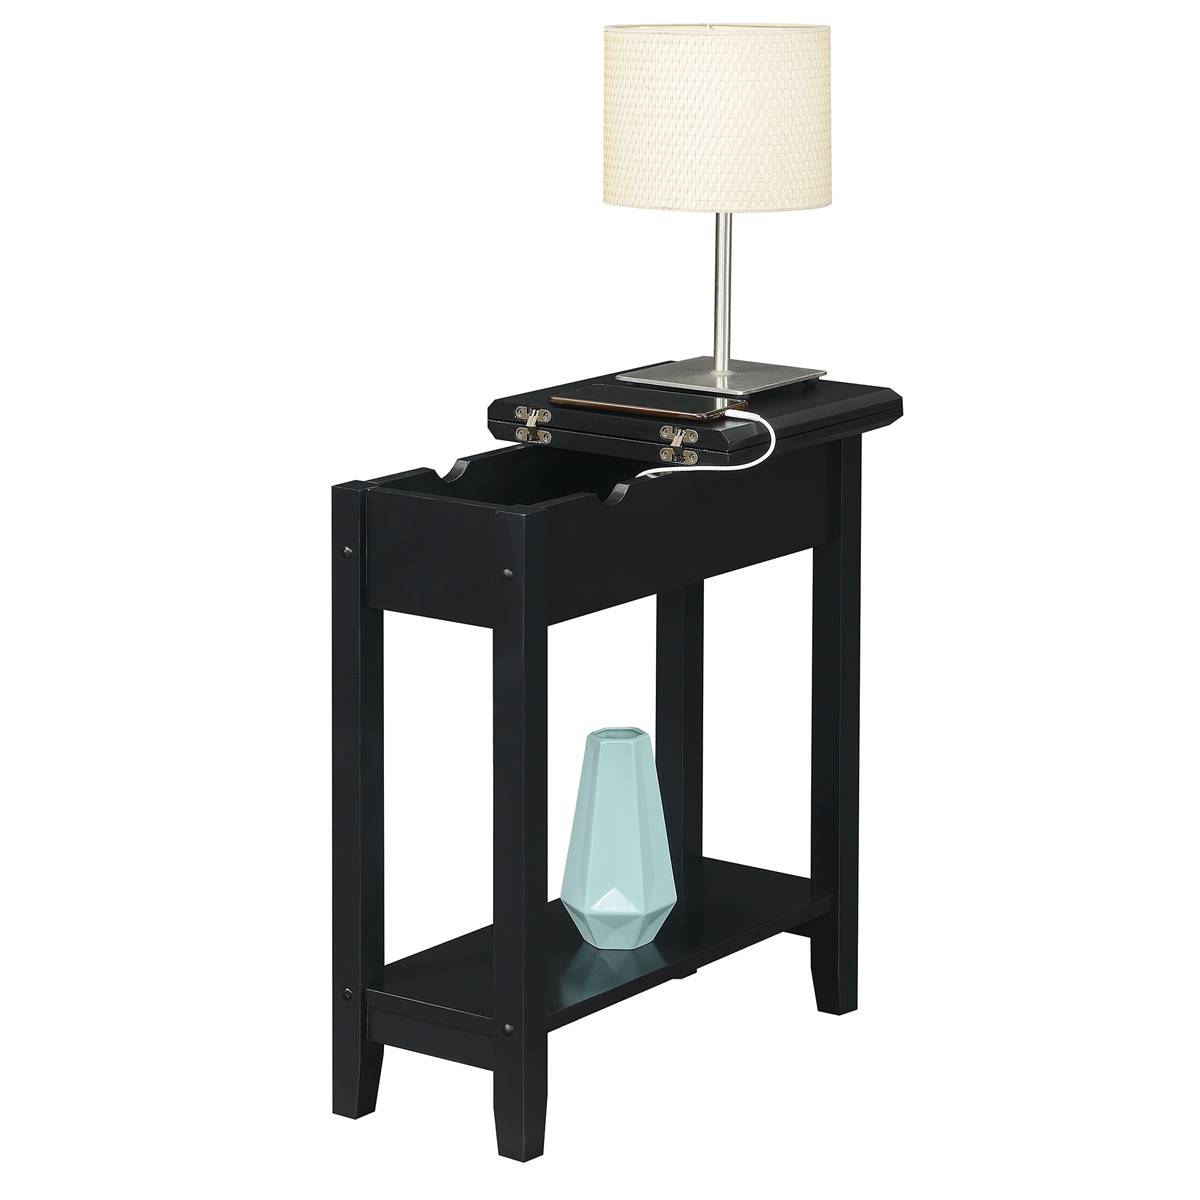 Convenience Concepts American Heritage Flip Top End Table